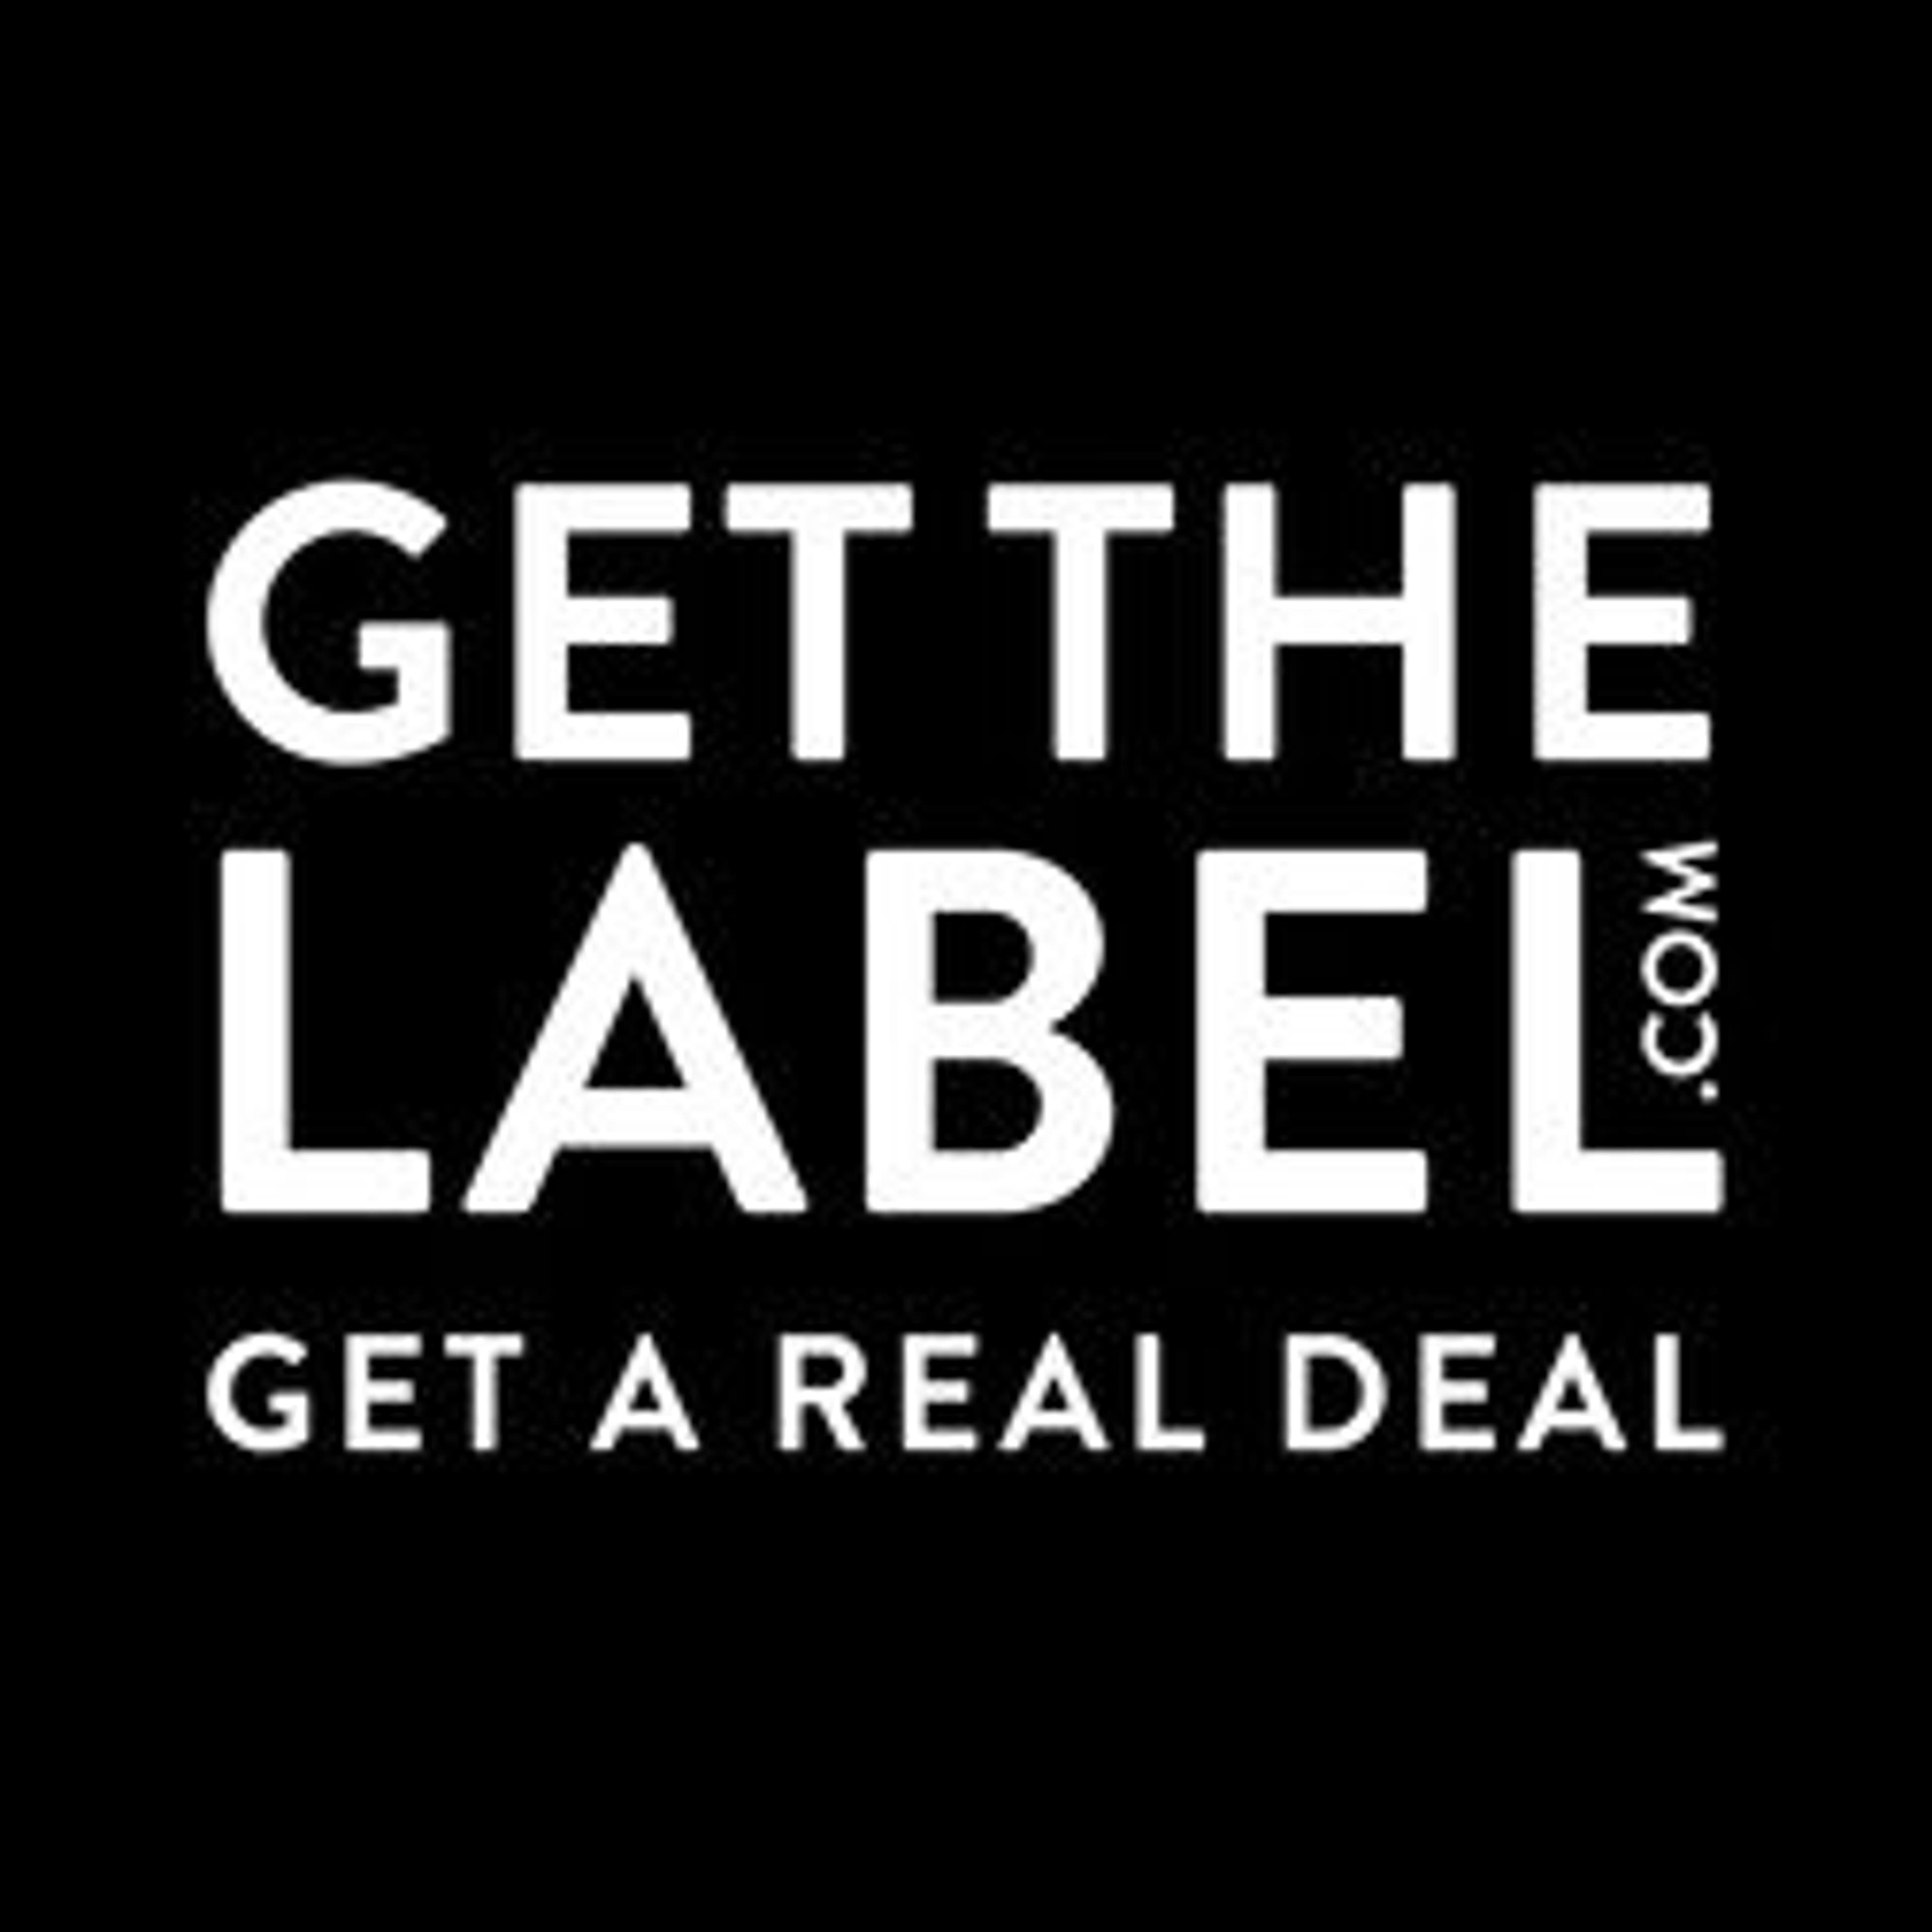  Get The Label 